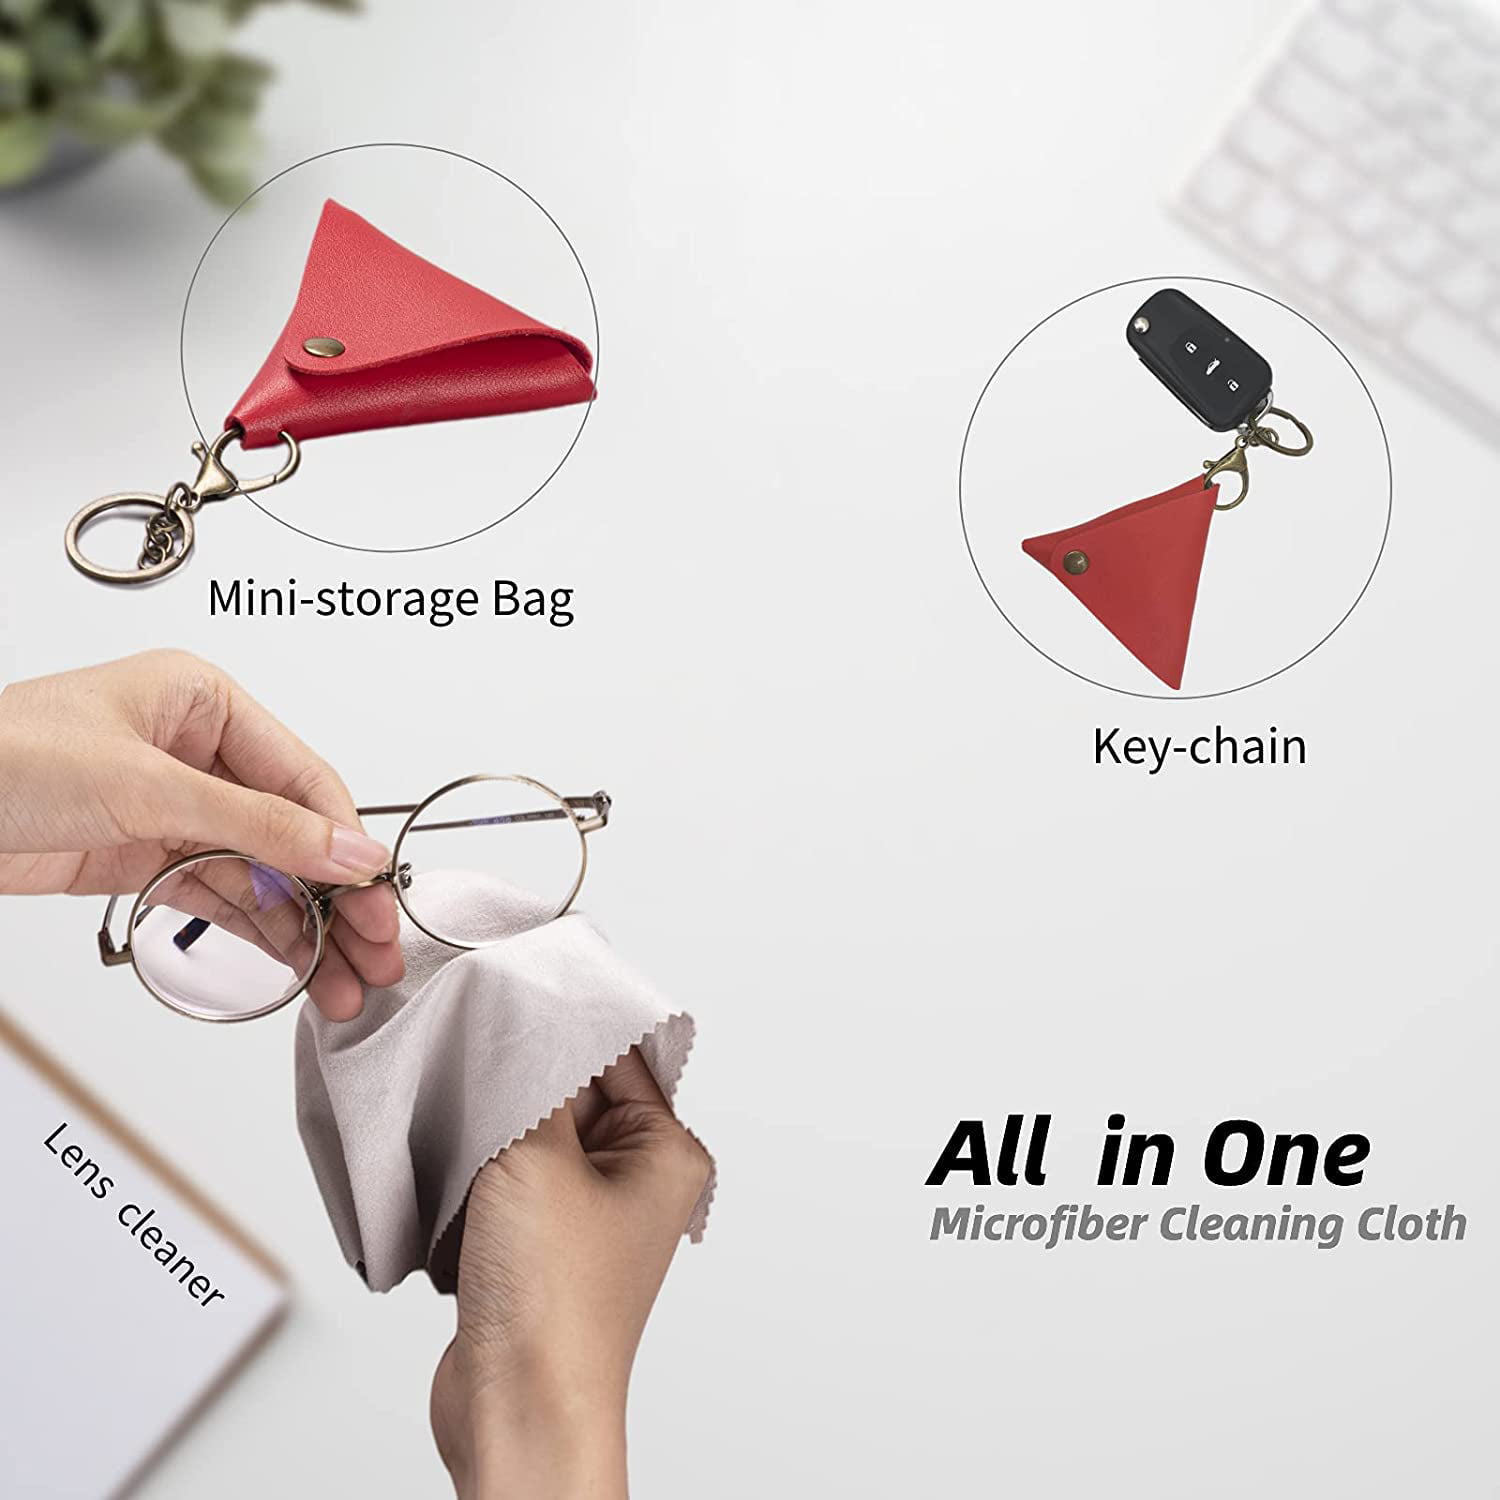 Off-White Bqover 8x8inch Microfiber Cleaning Cloth with Keychain,1 Pcs Microfiber Glasses Cases Cleaning & Storage,Safe for Eyeglasses,Lens,Phones,Tablets,Cameras